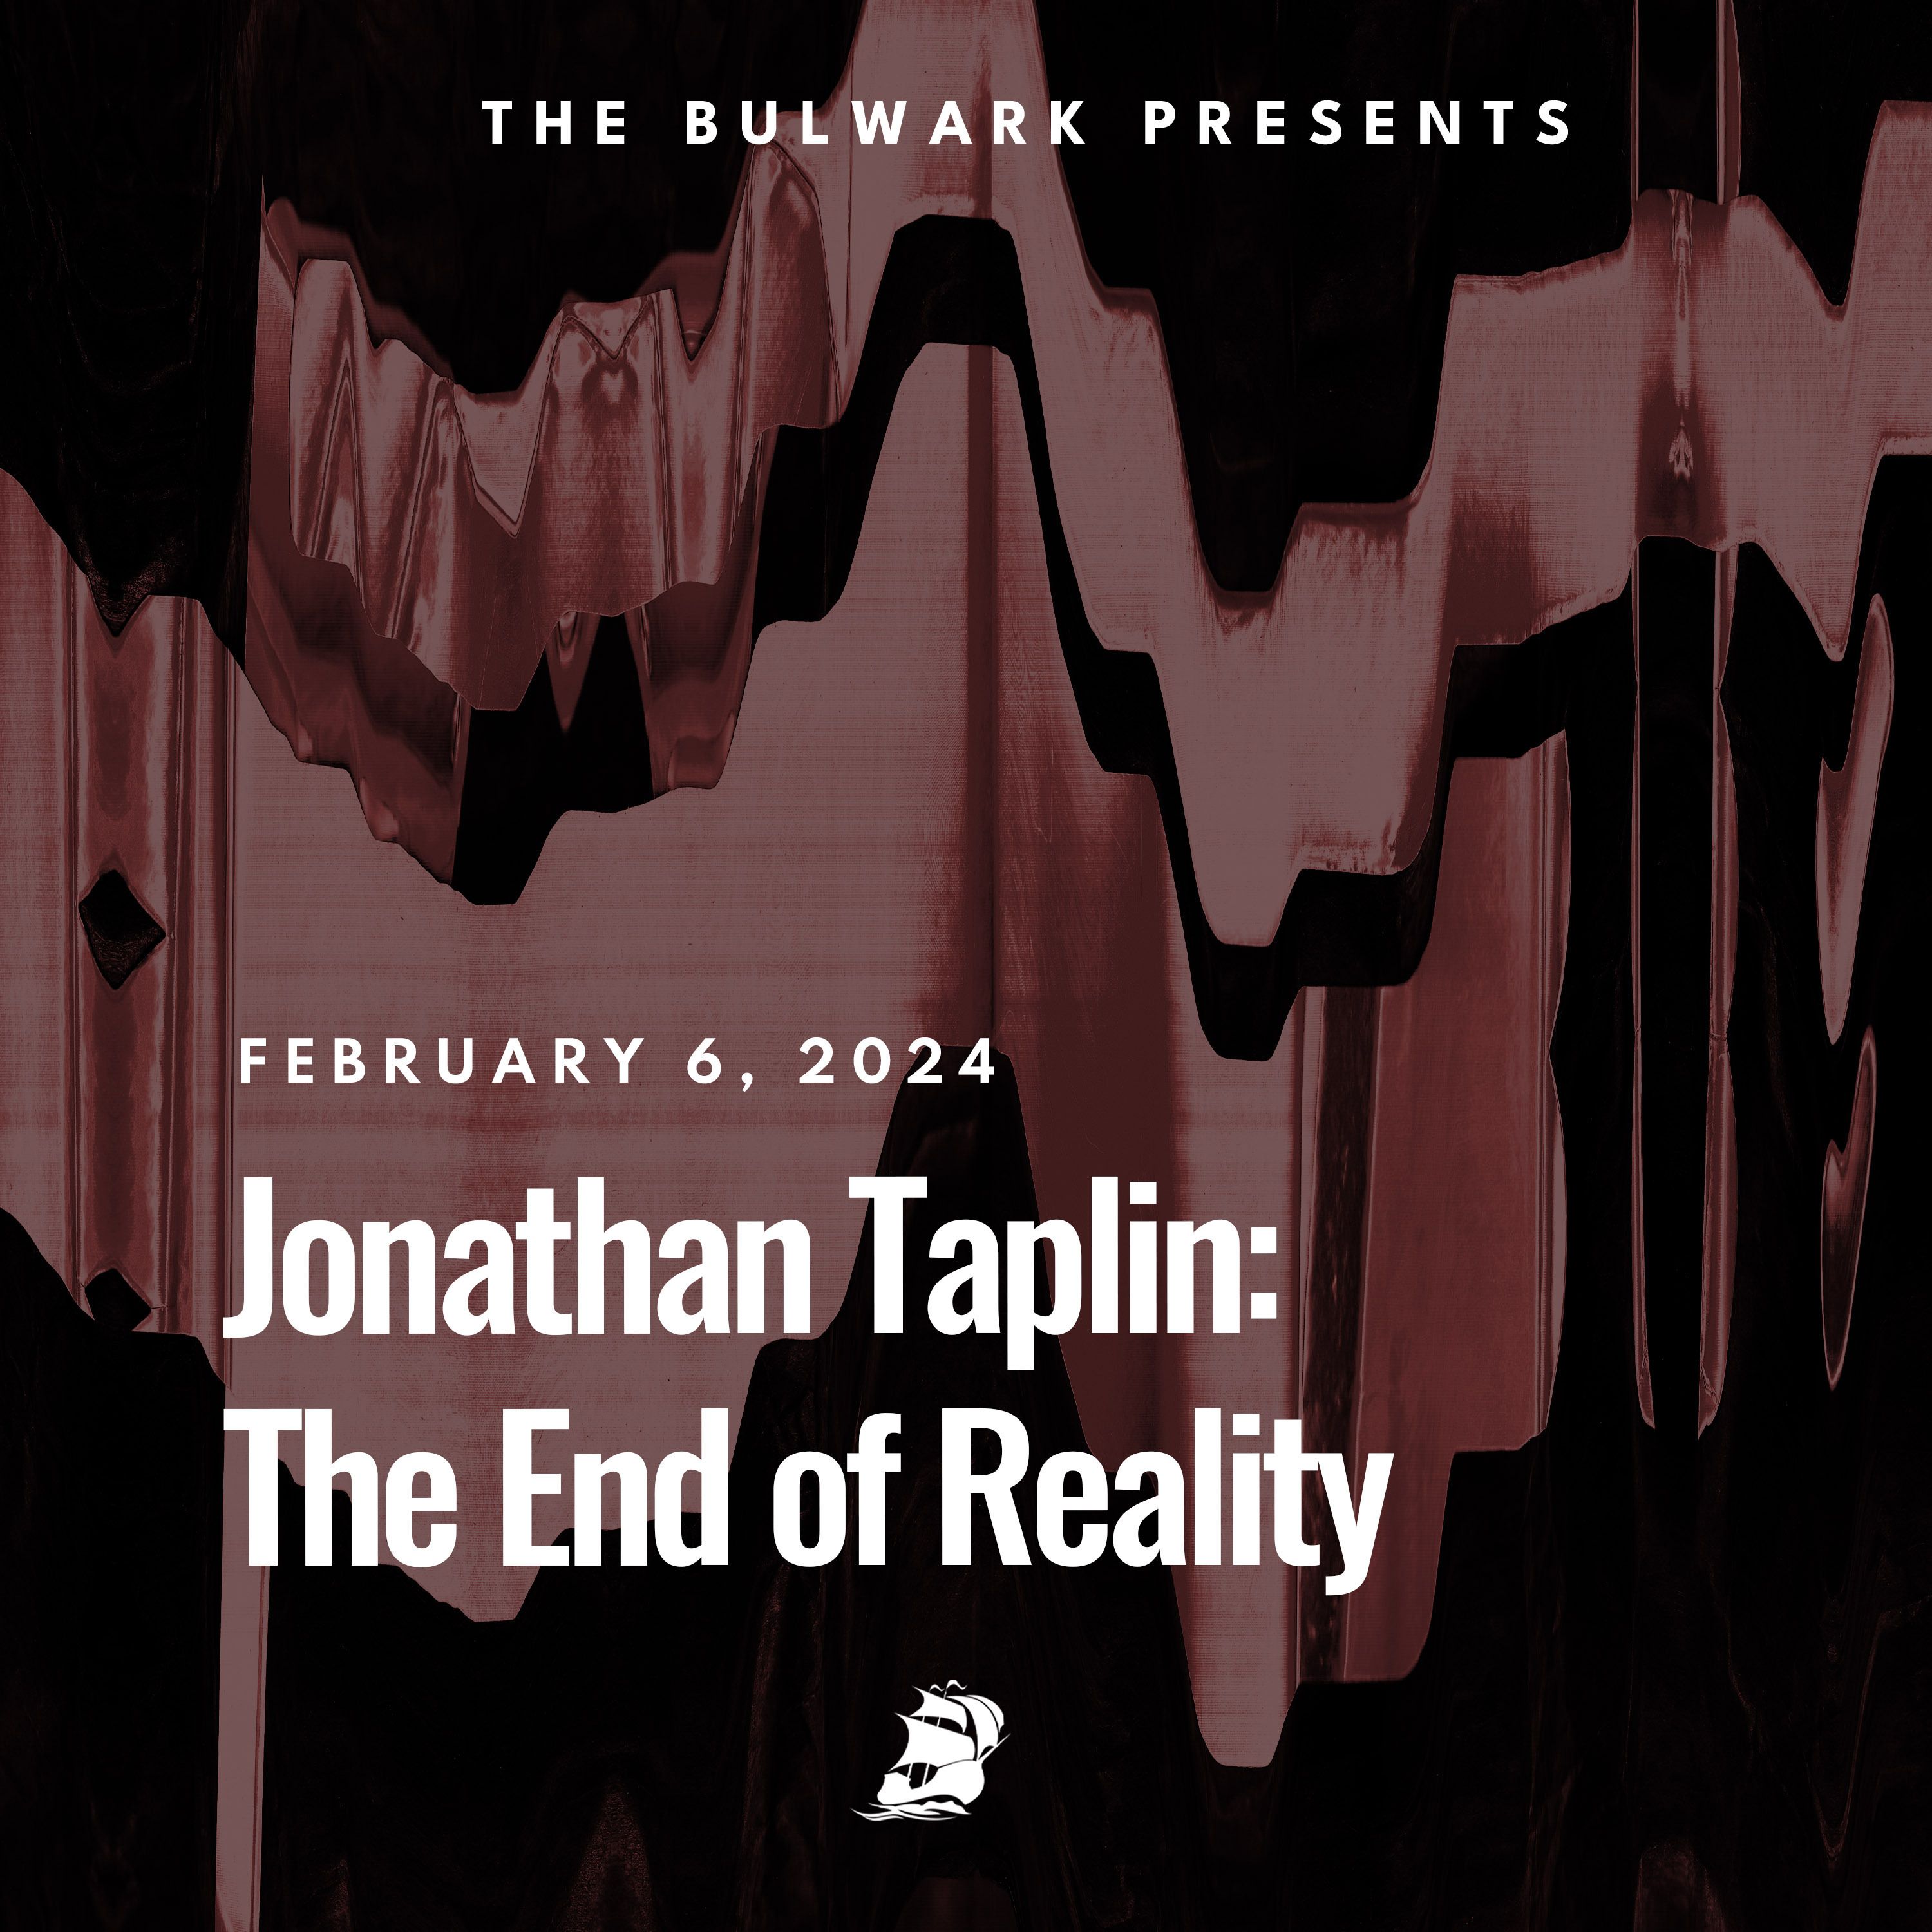 Jonathan Taplin: The End of Reality by The Bulwark Podcast